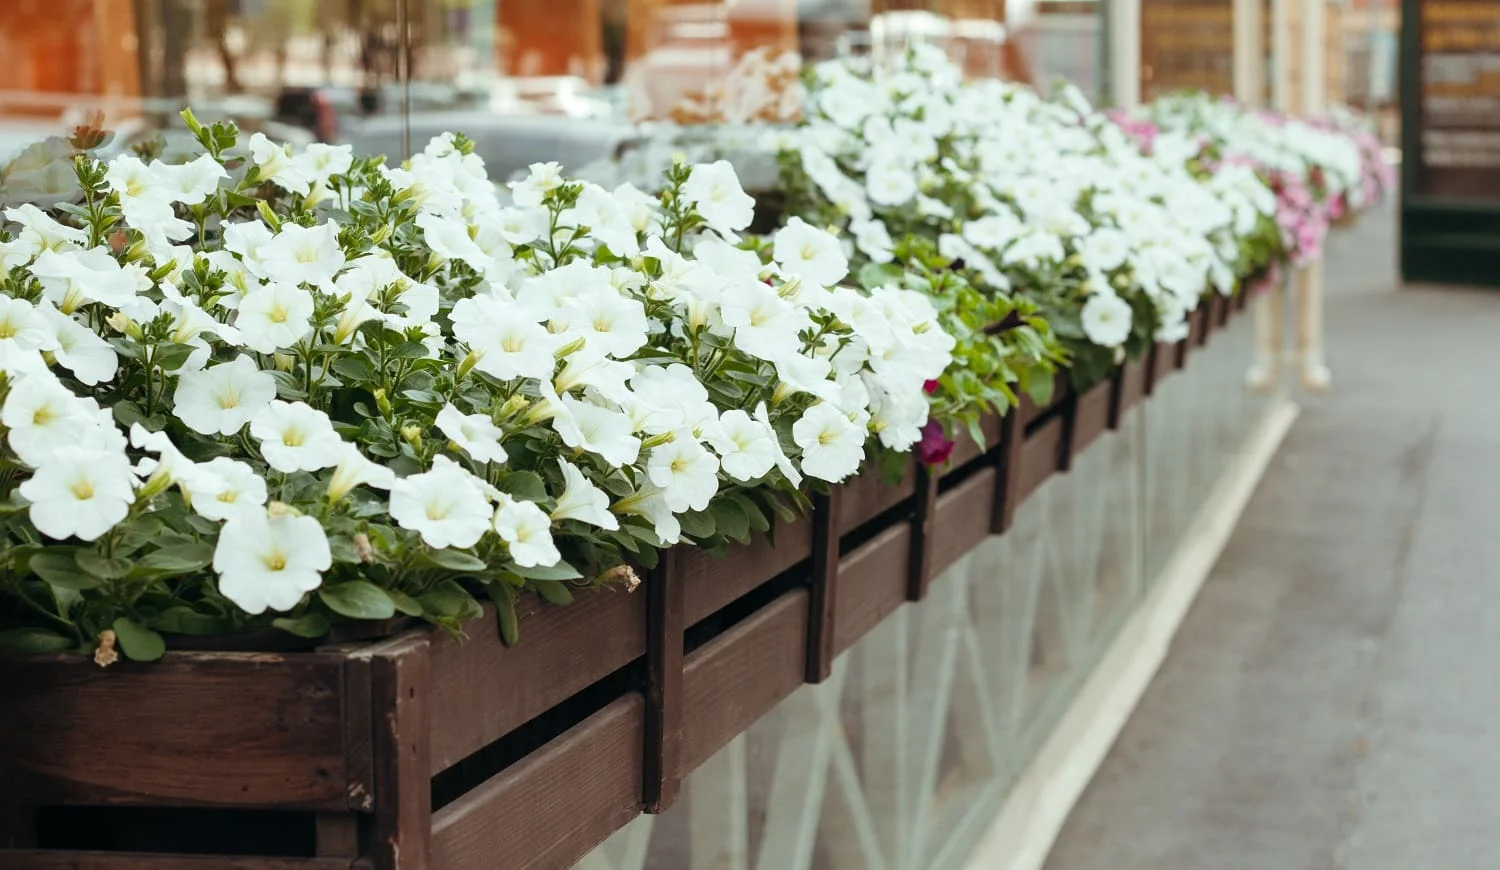 blooming white Petunia in a hanging retro planters on the street